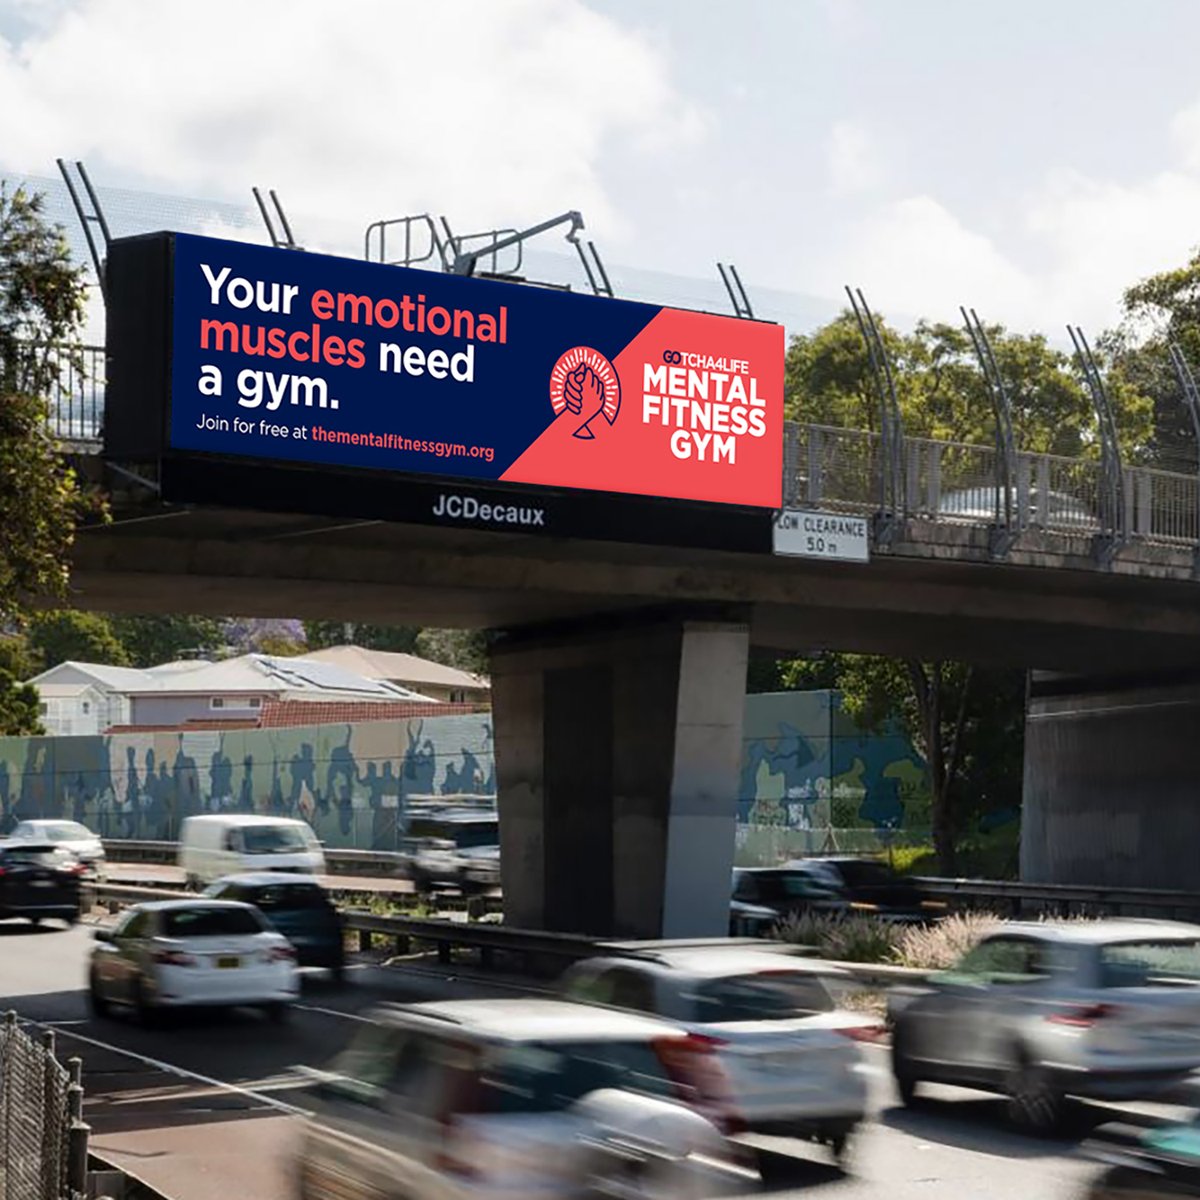 To launch a new kind of gym you need inspirational tools… and a big billboard. Share if you’ve spotted our #MentalFitnessGym ads around the country. #Gotcha4Life #MentalFitness